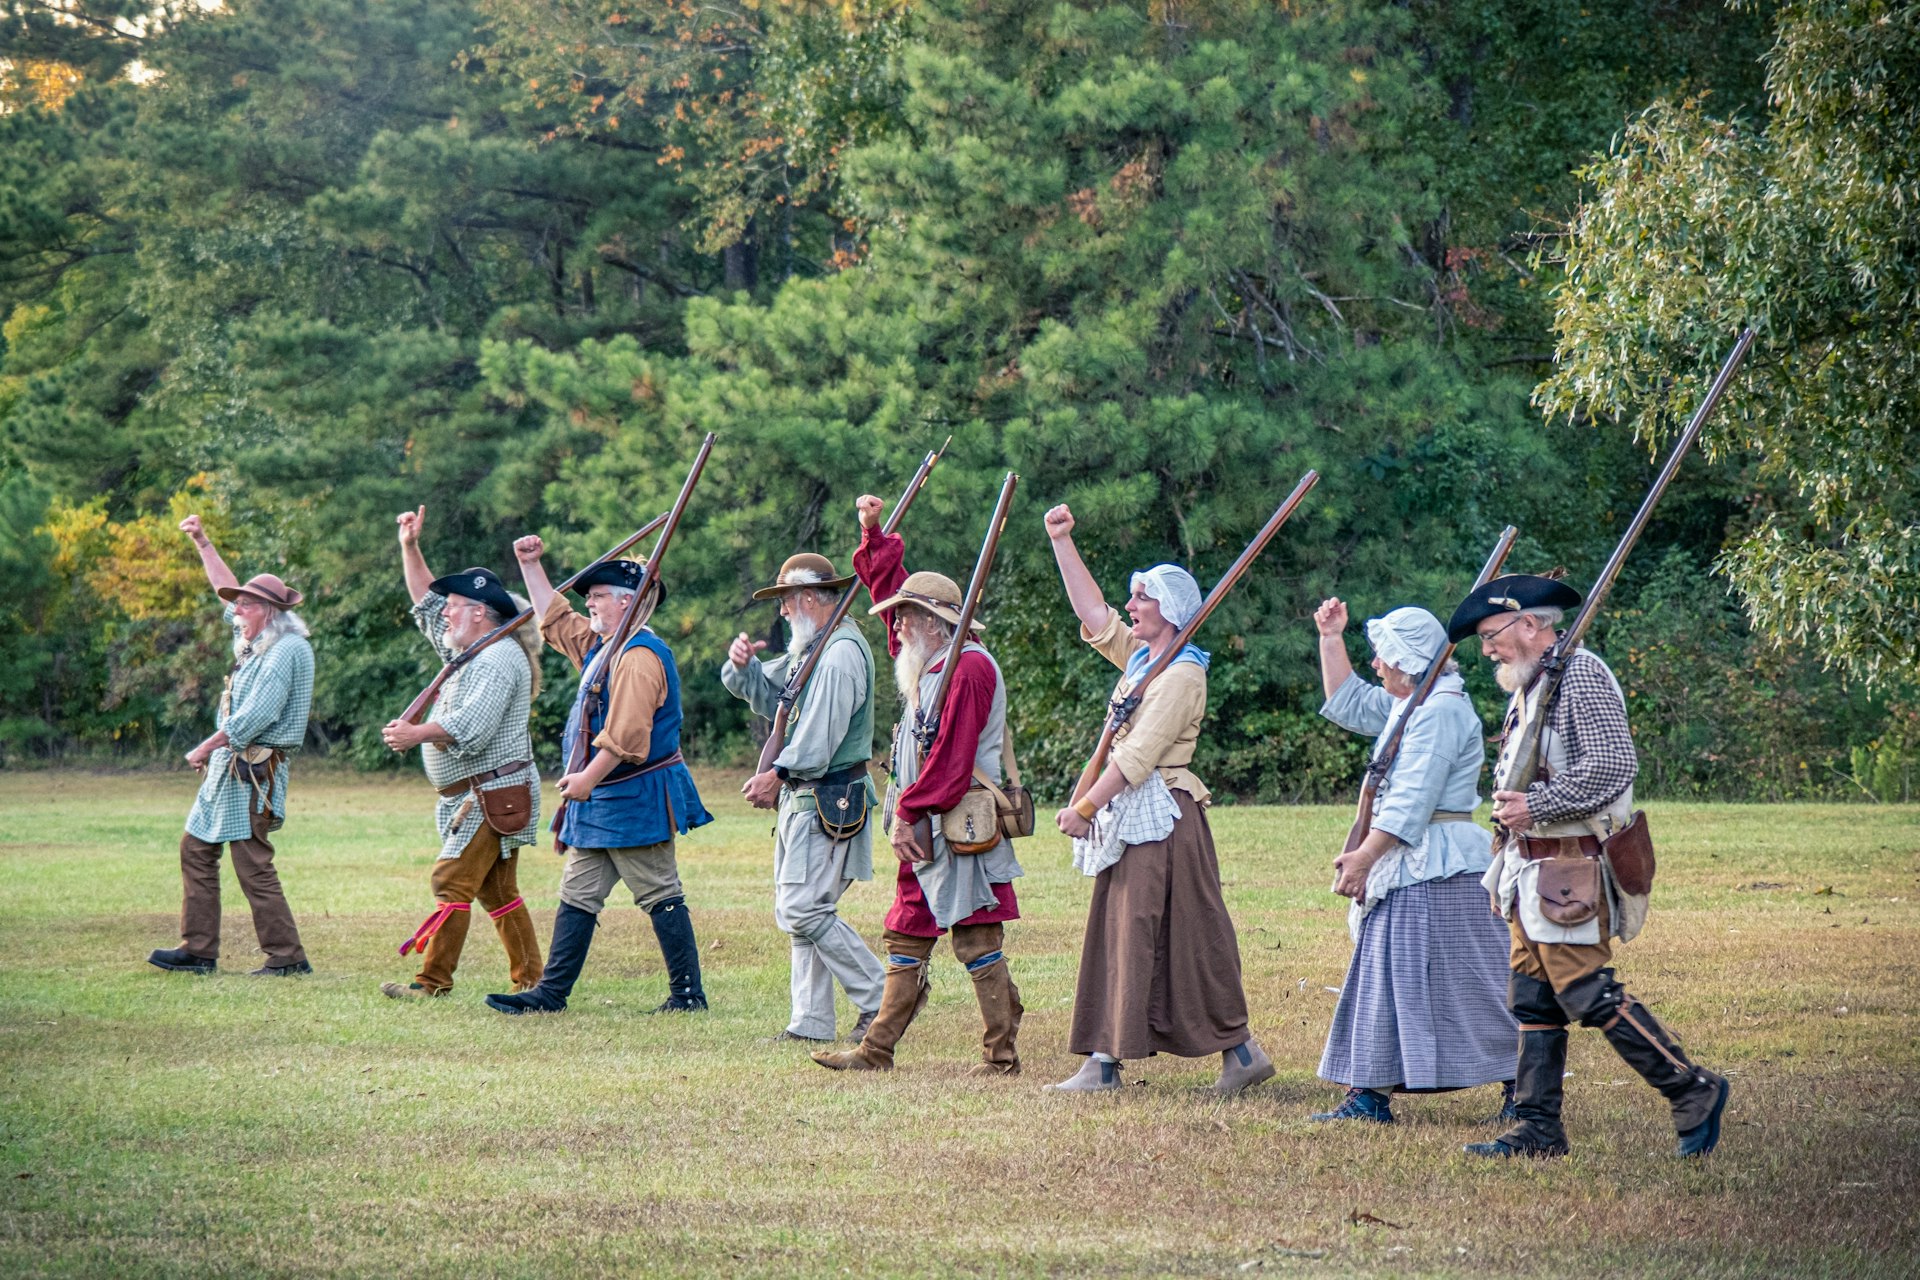 Historic re-enactors in 18th-century costumes at Cowpens National Battlefield, South Carolina USA